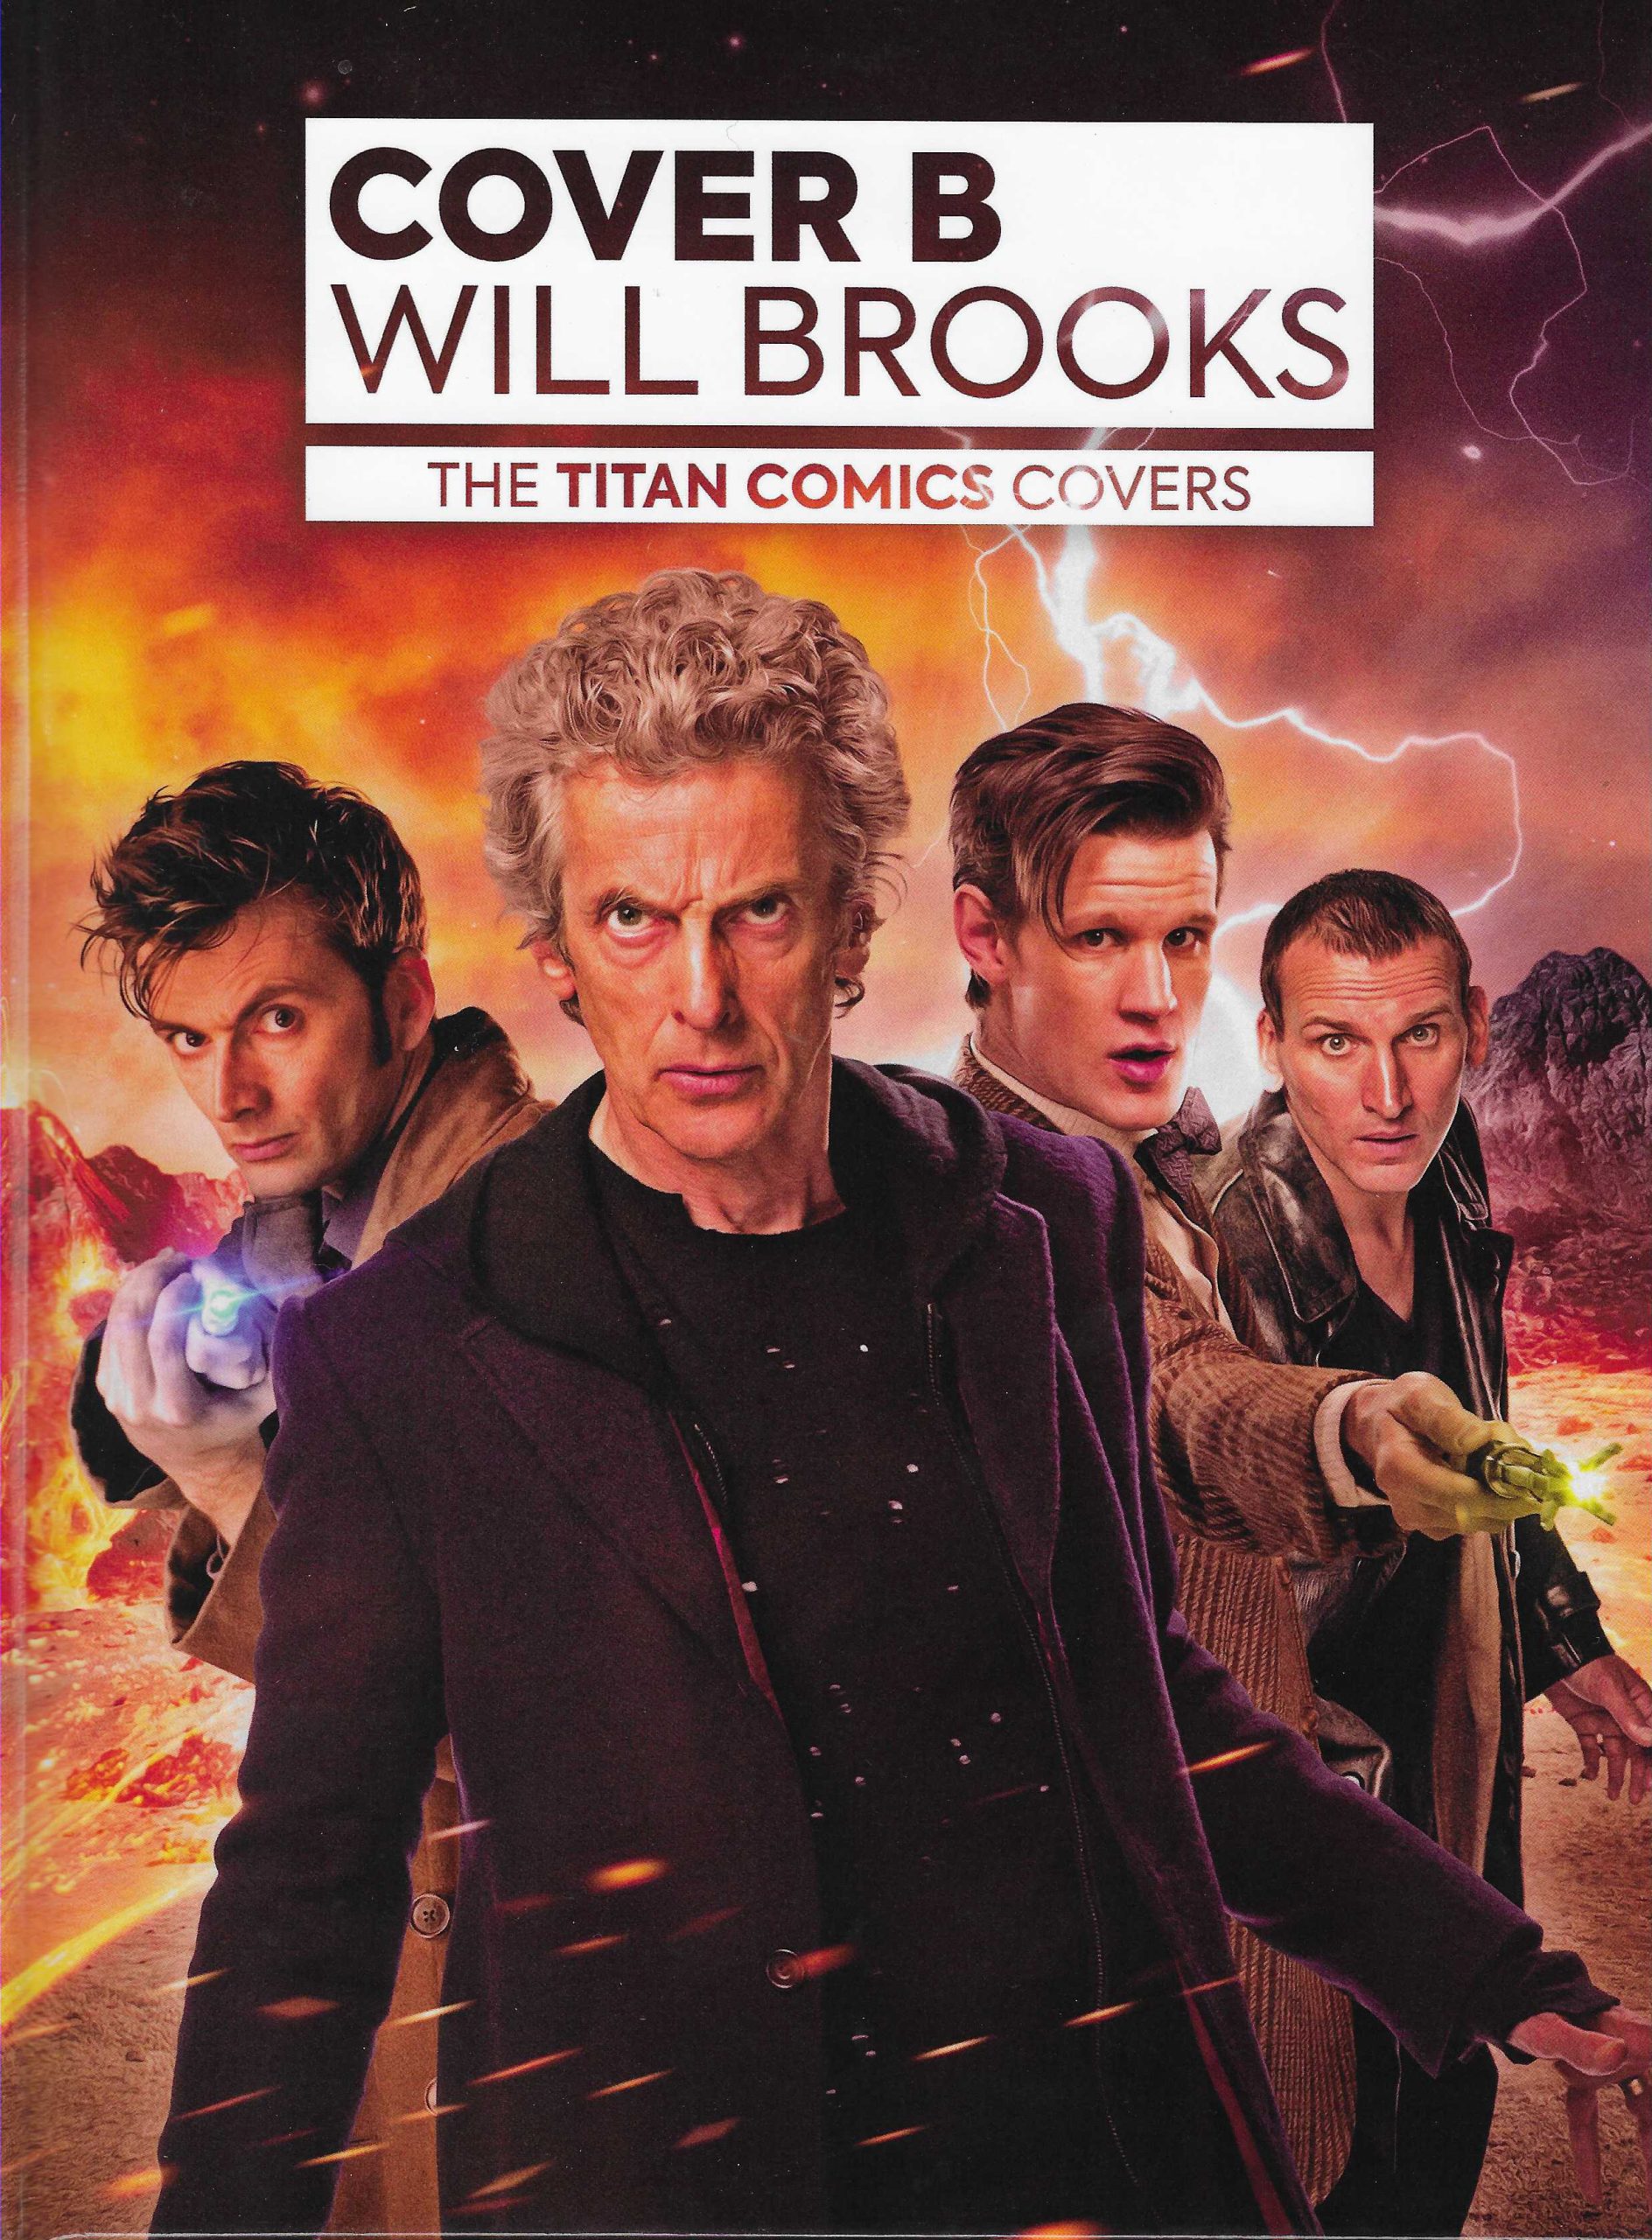 Book Review: Cover B by Will Brooks